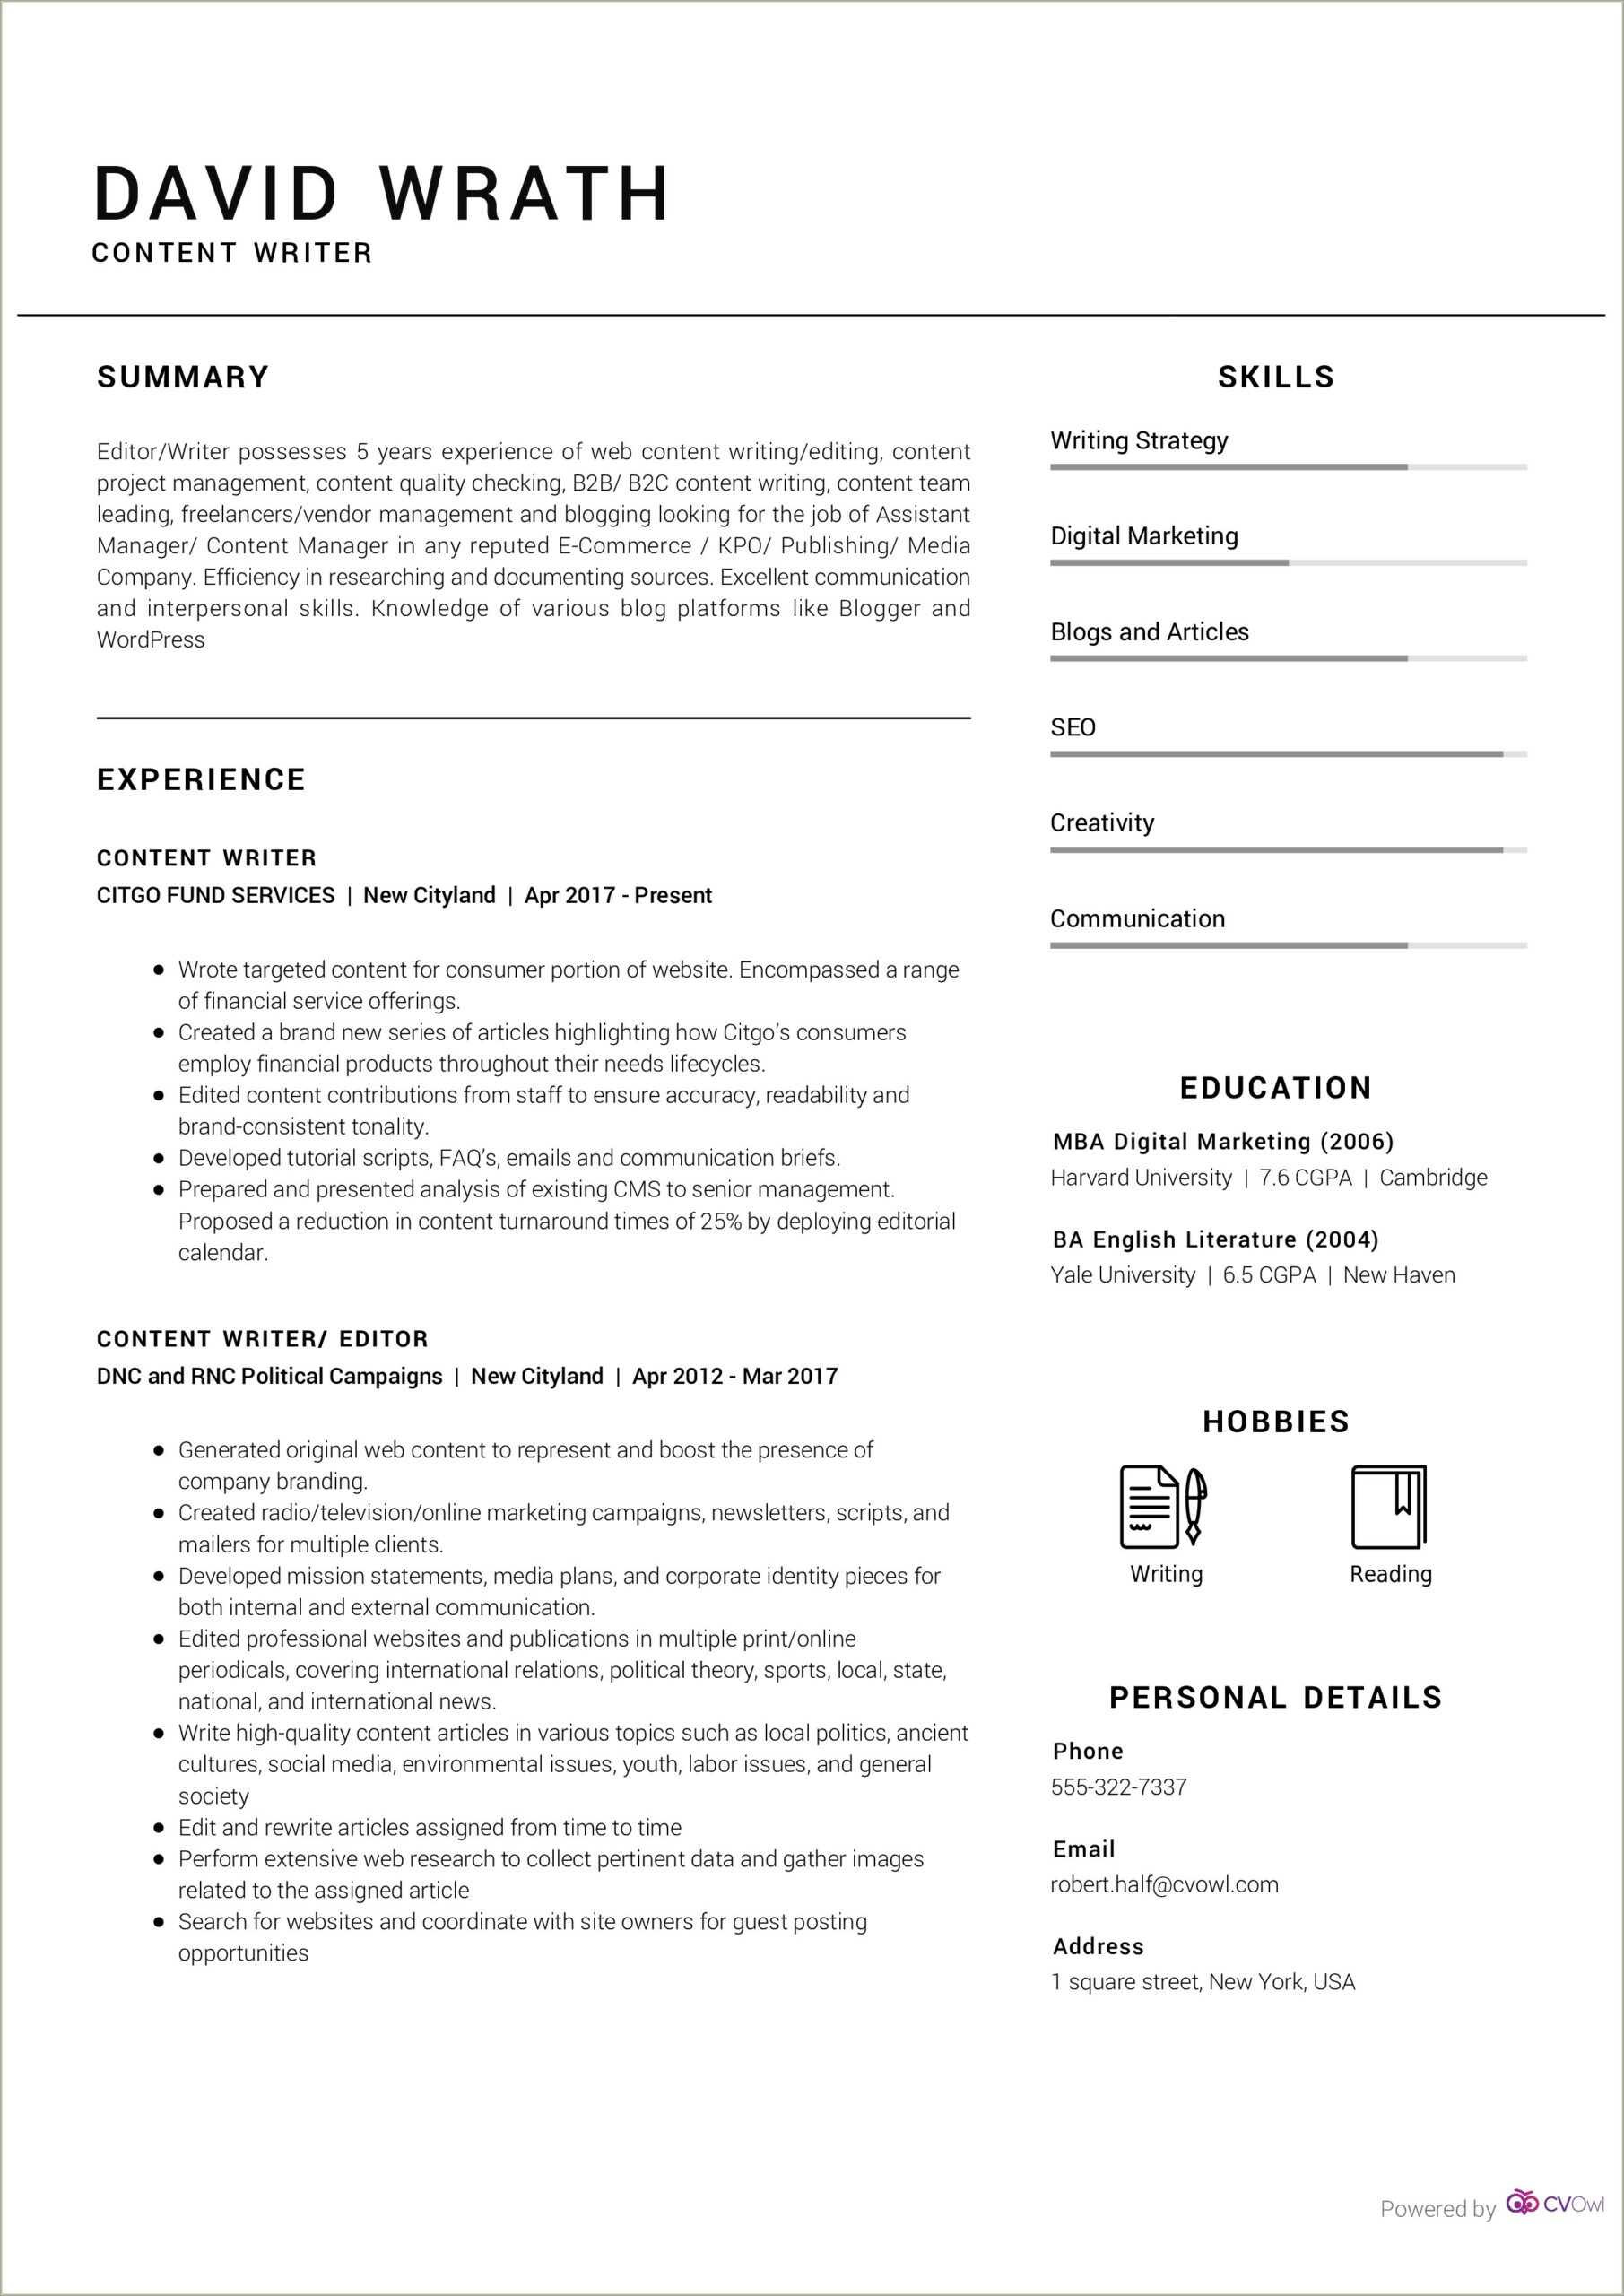 Resume Objective For Web Content Writing